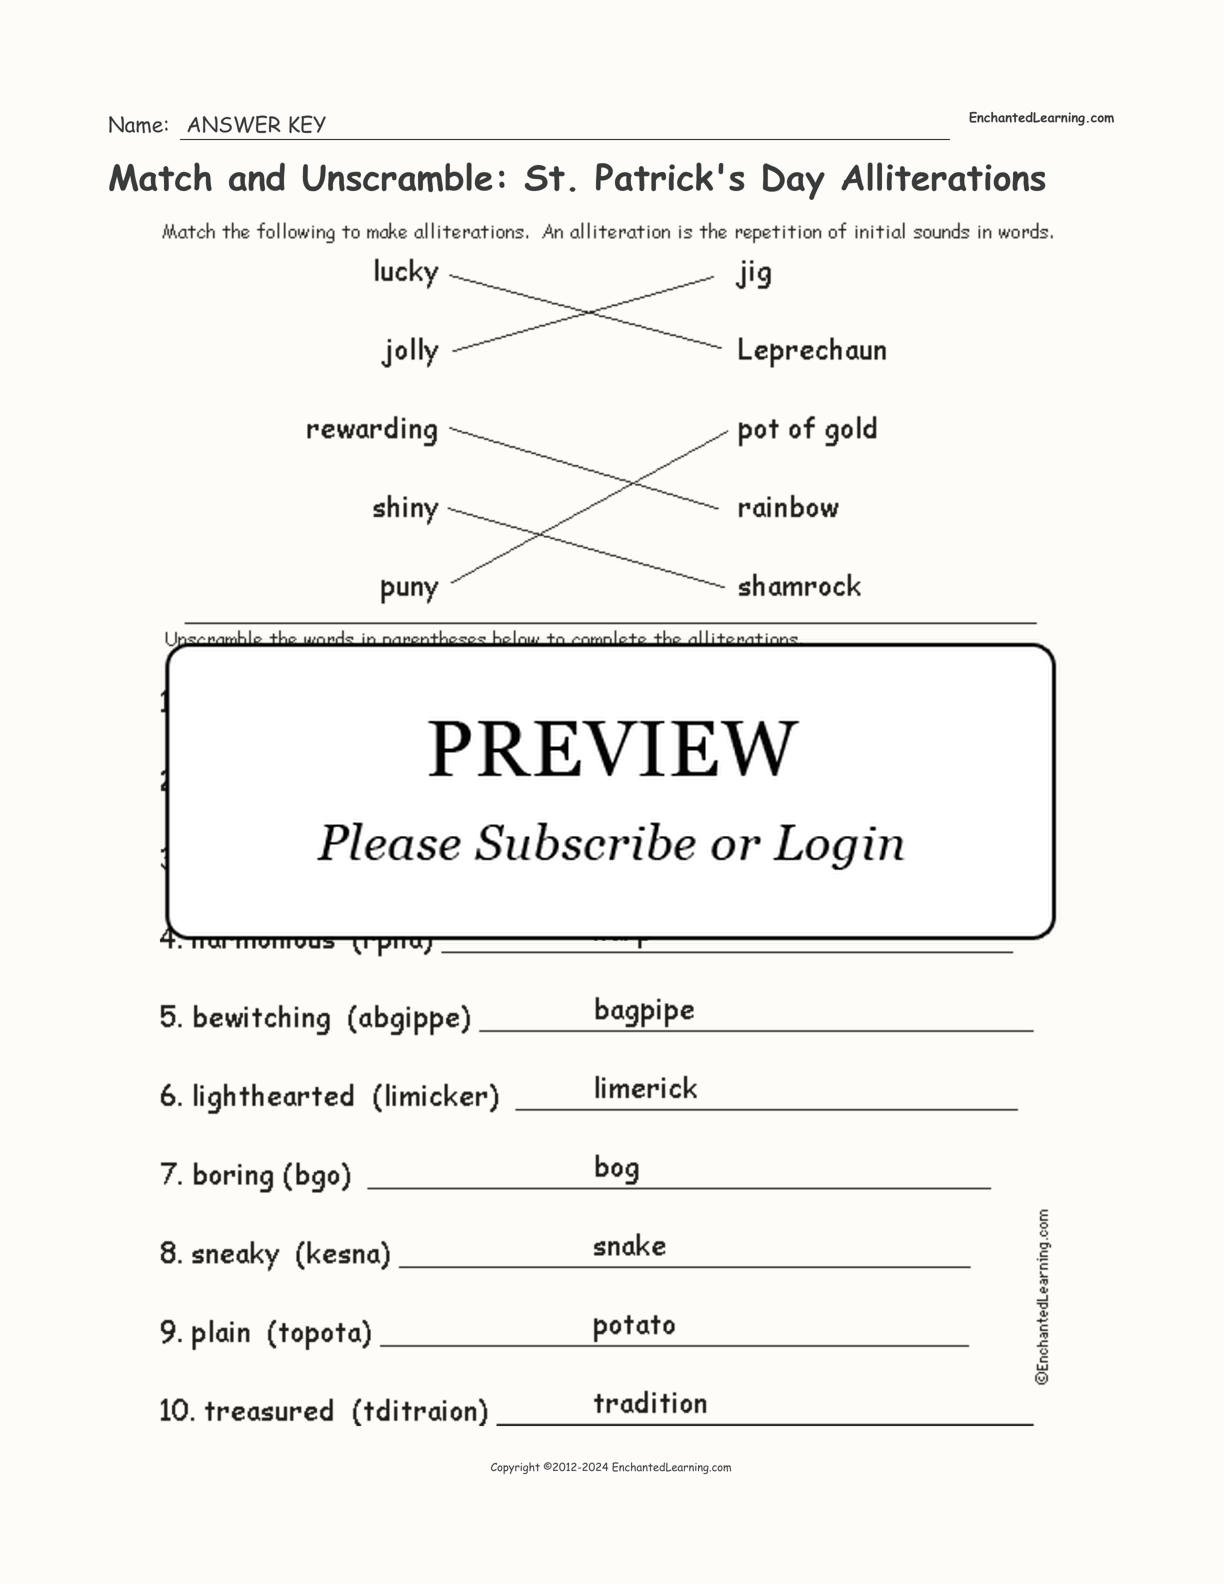 Match and Unscramble: St. Patrick's Day Alliterations interactive worksheet page 2